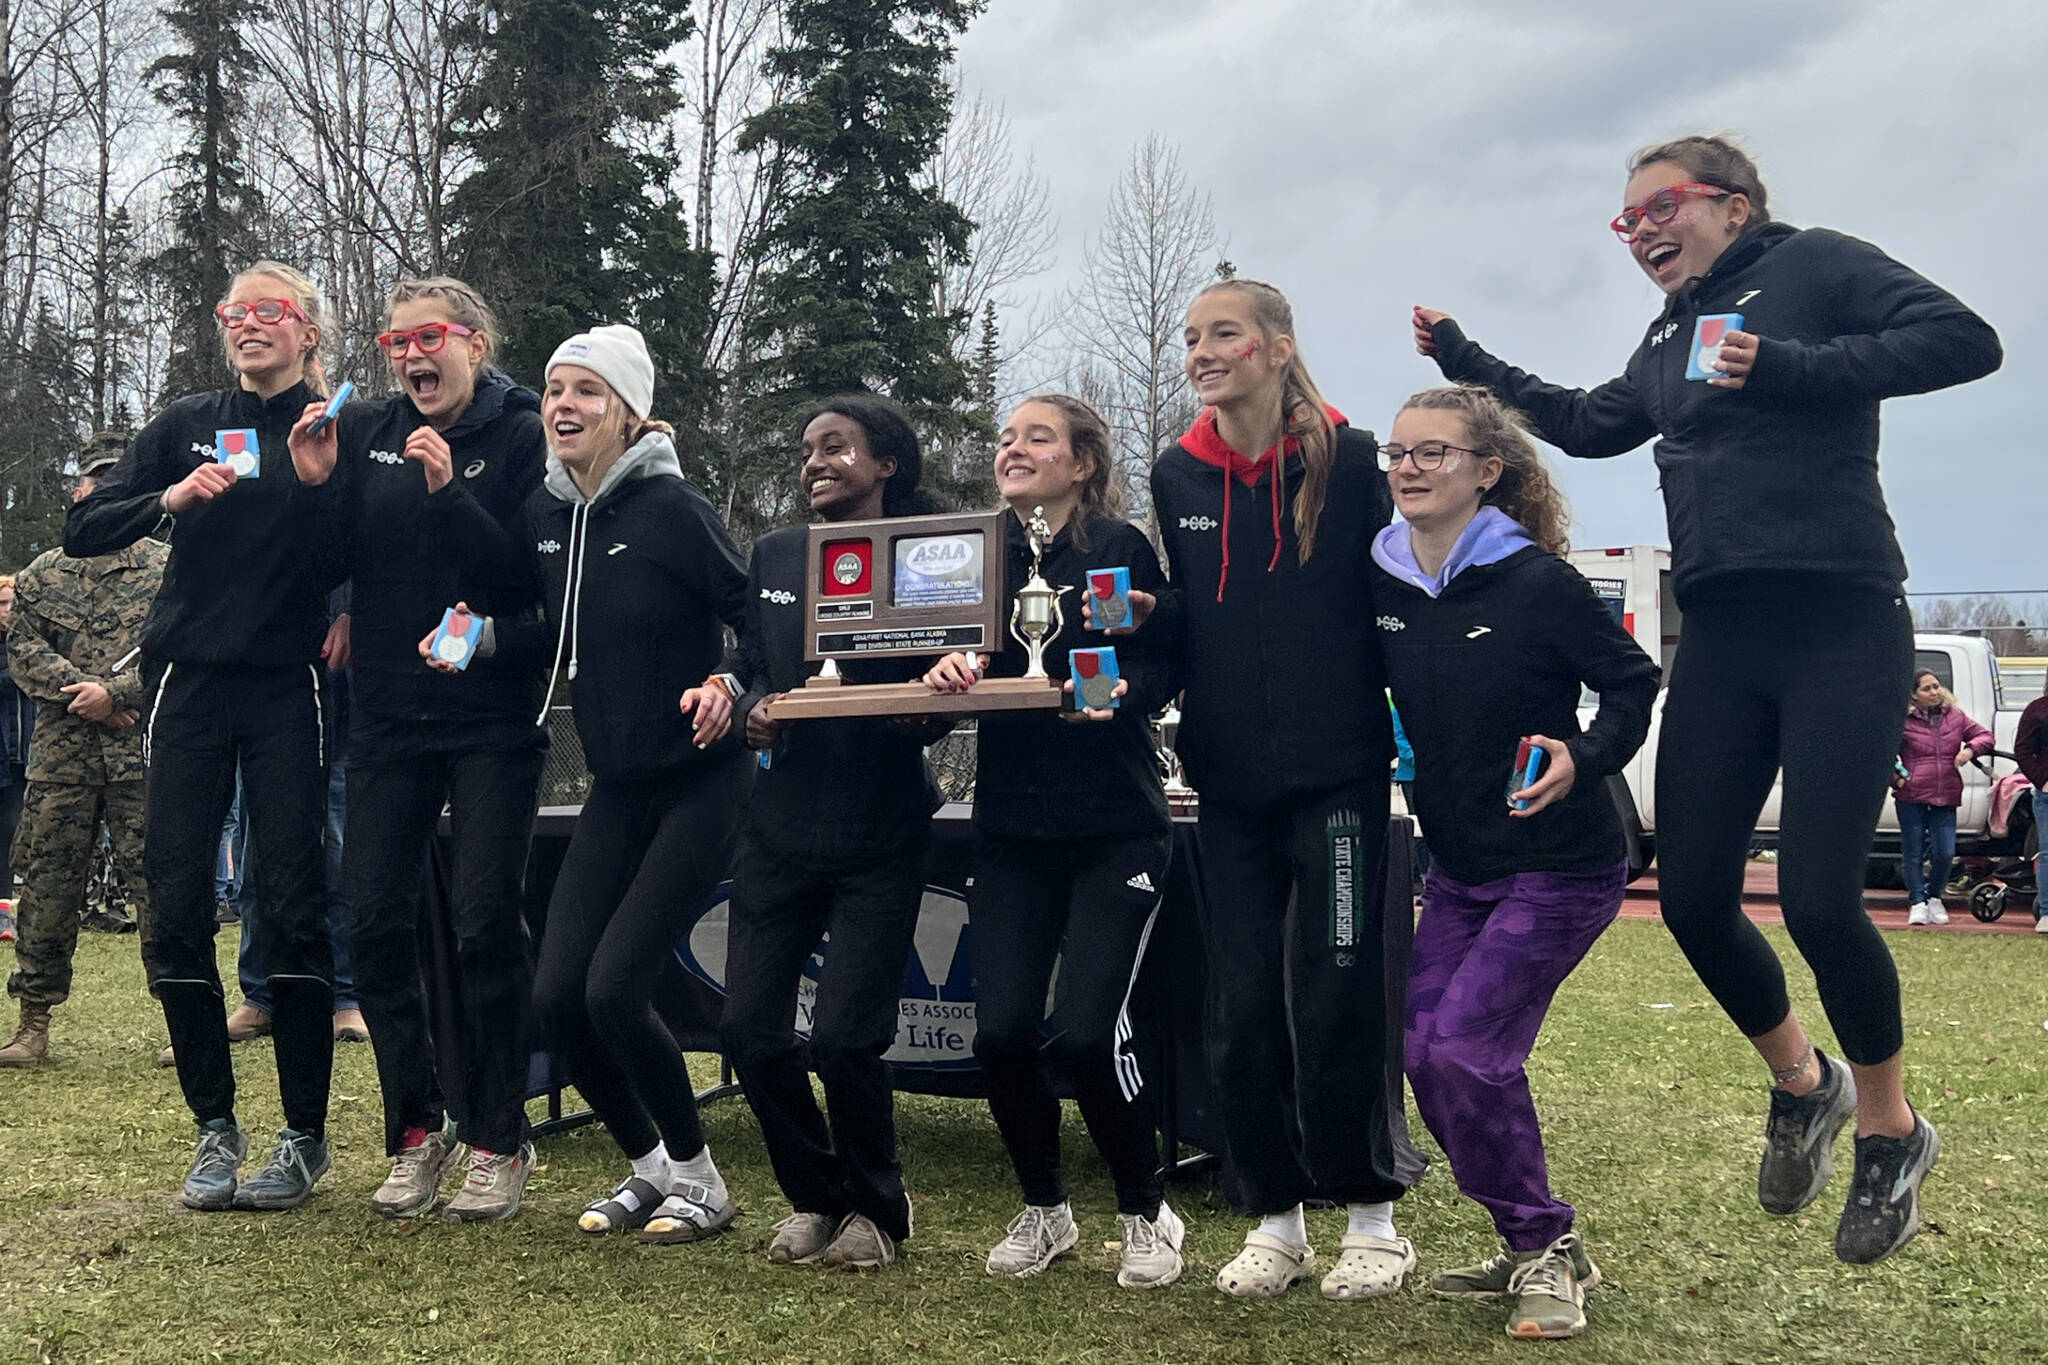 Juneau-Douglas High School: Yadaa.at Kalé’s varsity girls cross-country team attempts a jumping photo after winning the second place title at state meet over the weekend, hosted in Anchorage by Bartlett High School. (Courtesy / Christy Newell)